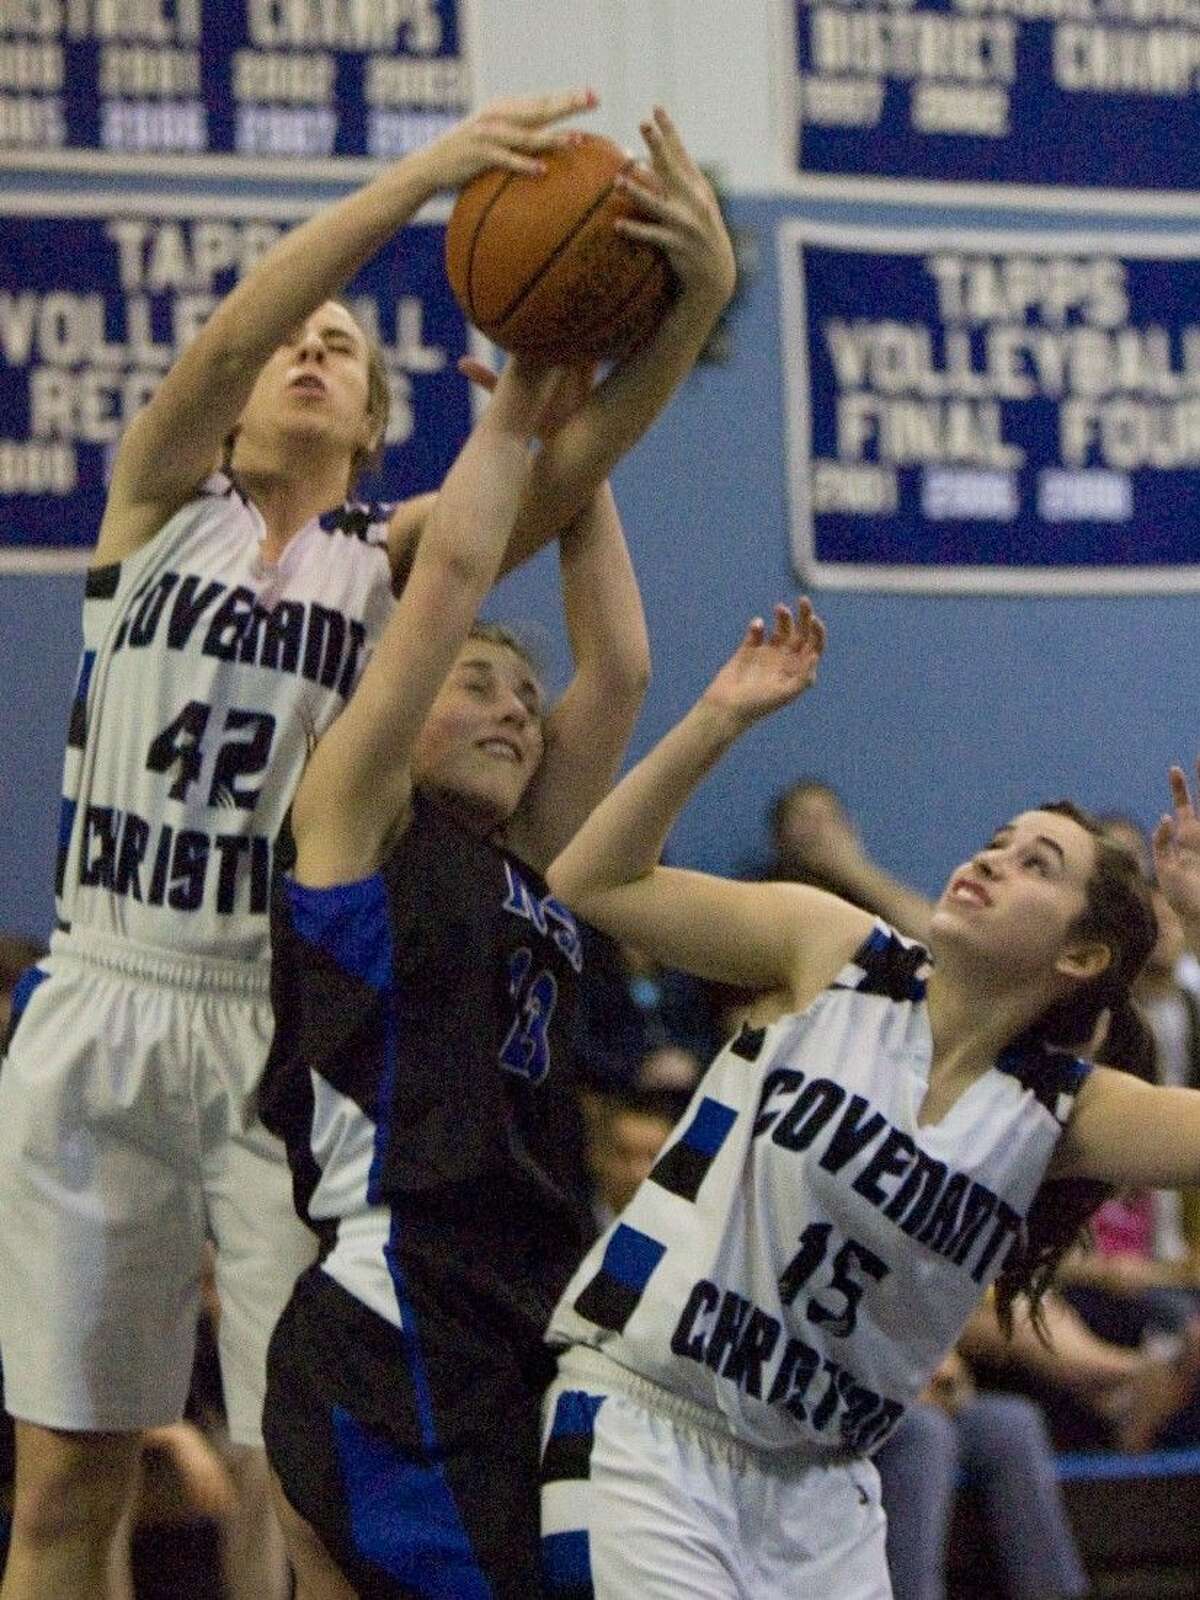 Covenant Christian's Lu-Cheree de Jager (42) during her playing days.